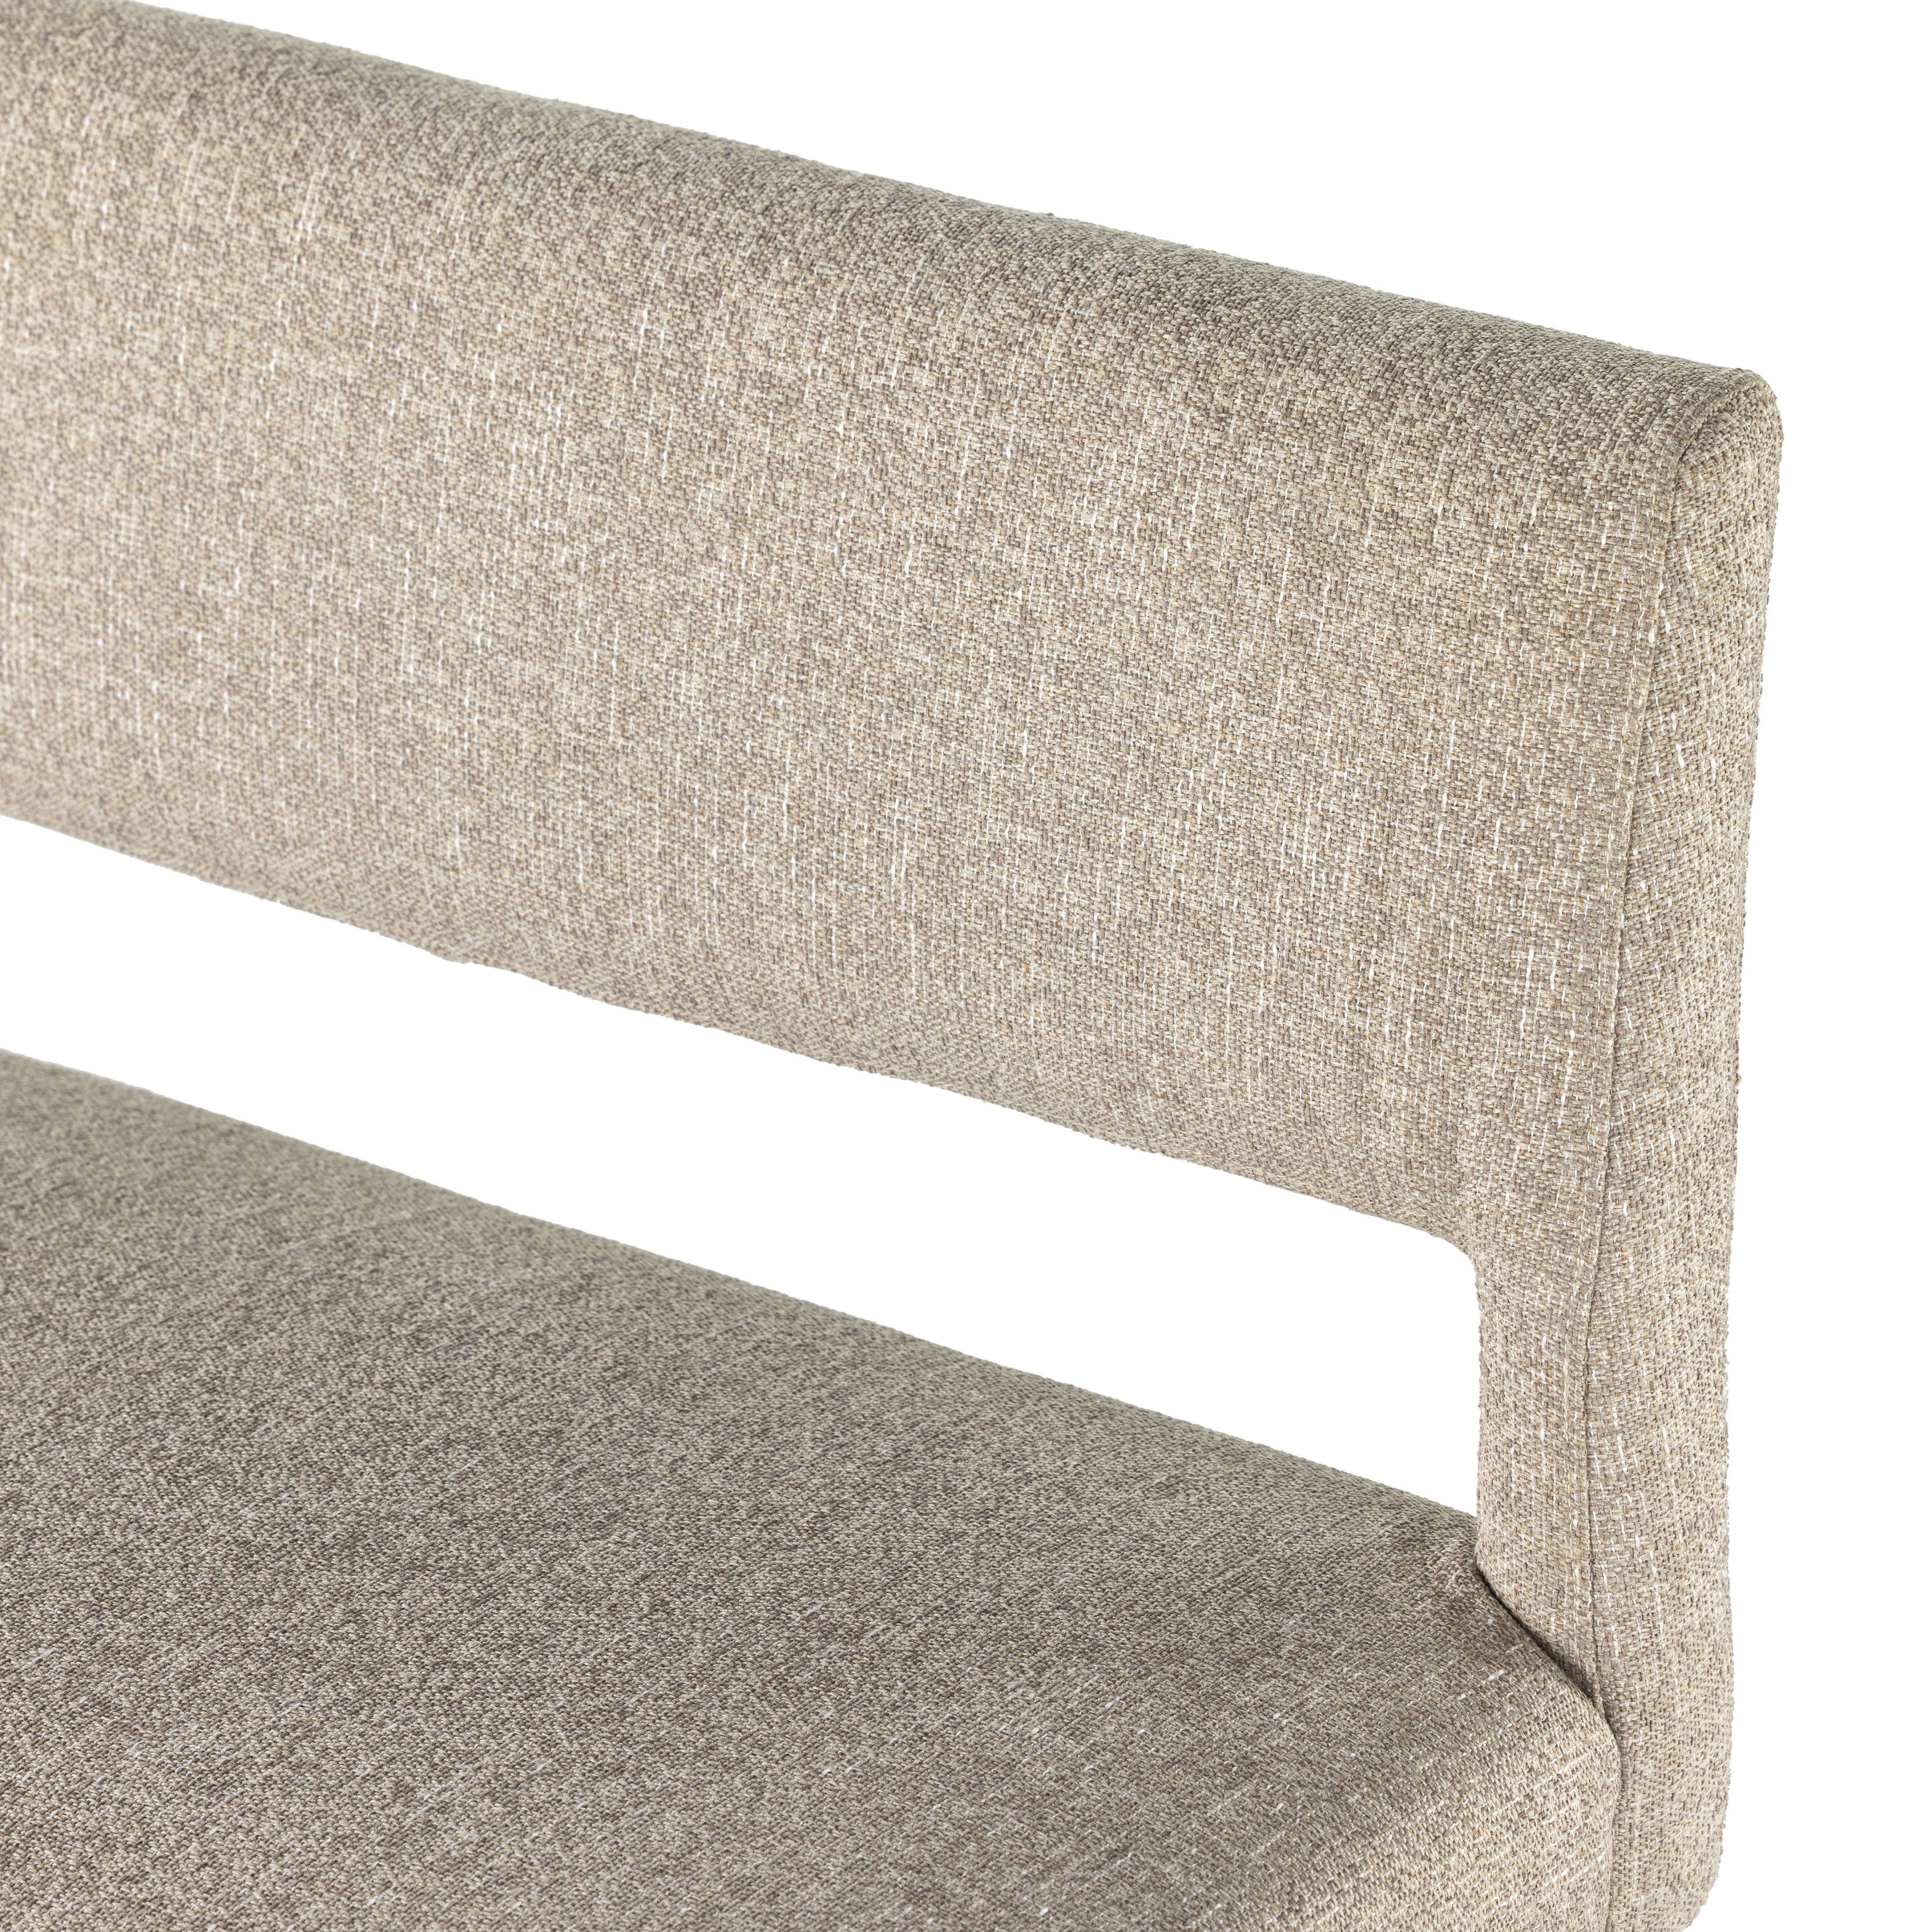 Simply styled and midcentury-minded, Joseph Light Camel Dining Bench is a textural light taupe upholstery that features a posterior cutout for added flair, with toasted nettlewood legs for natural contrast. Amethyst Home provides interior design services, furniture, rugs, and lighting in the Salt Lake City metro area. 